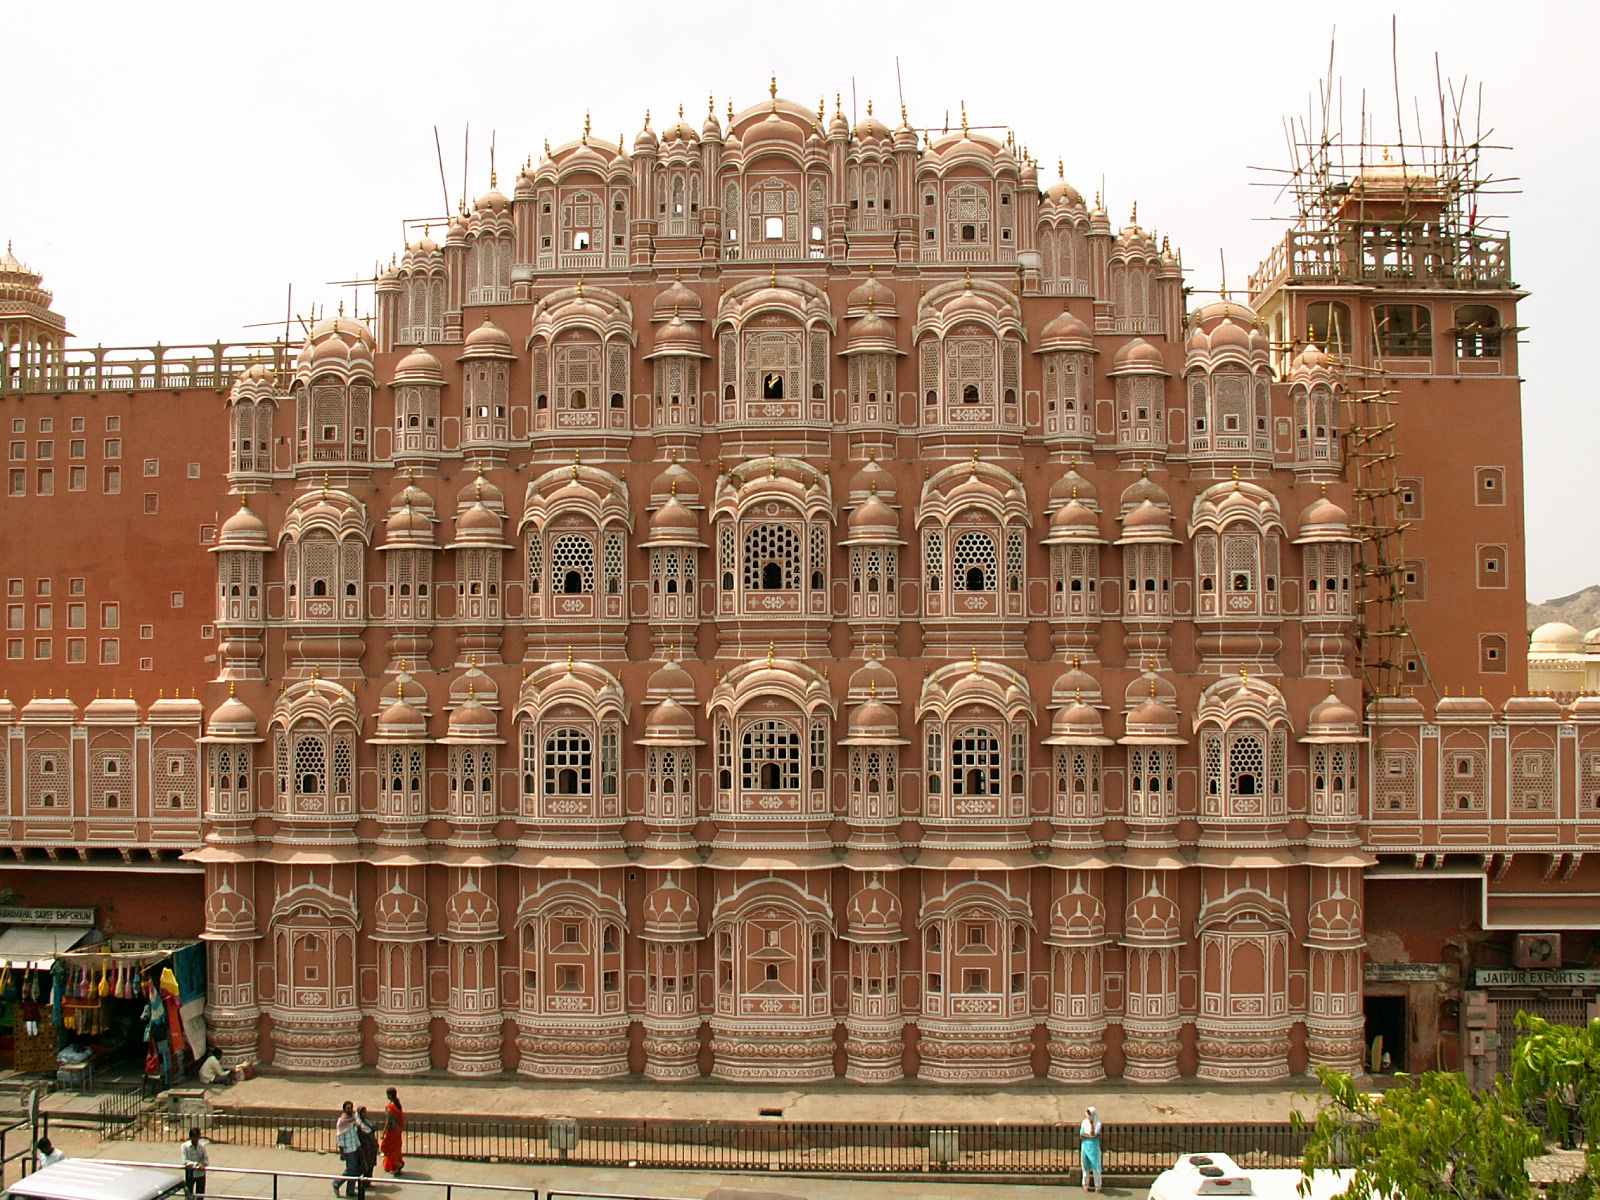 Rajasthan’s Pink City: The Top Things to Do in Jaipur